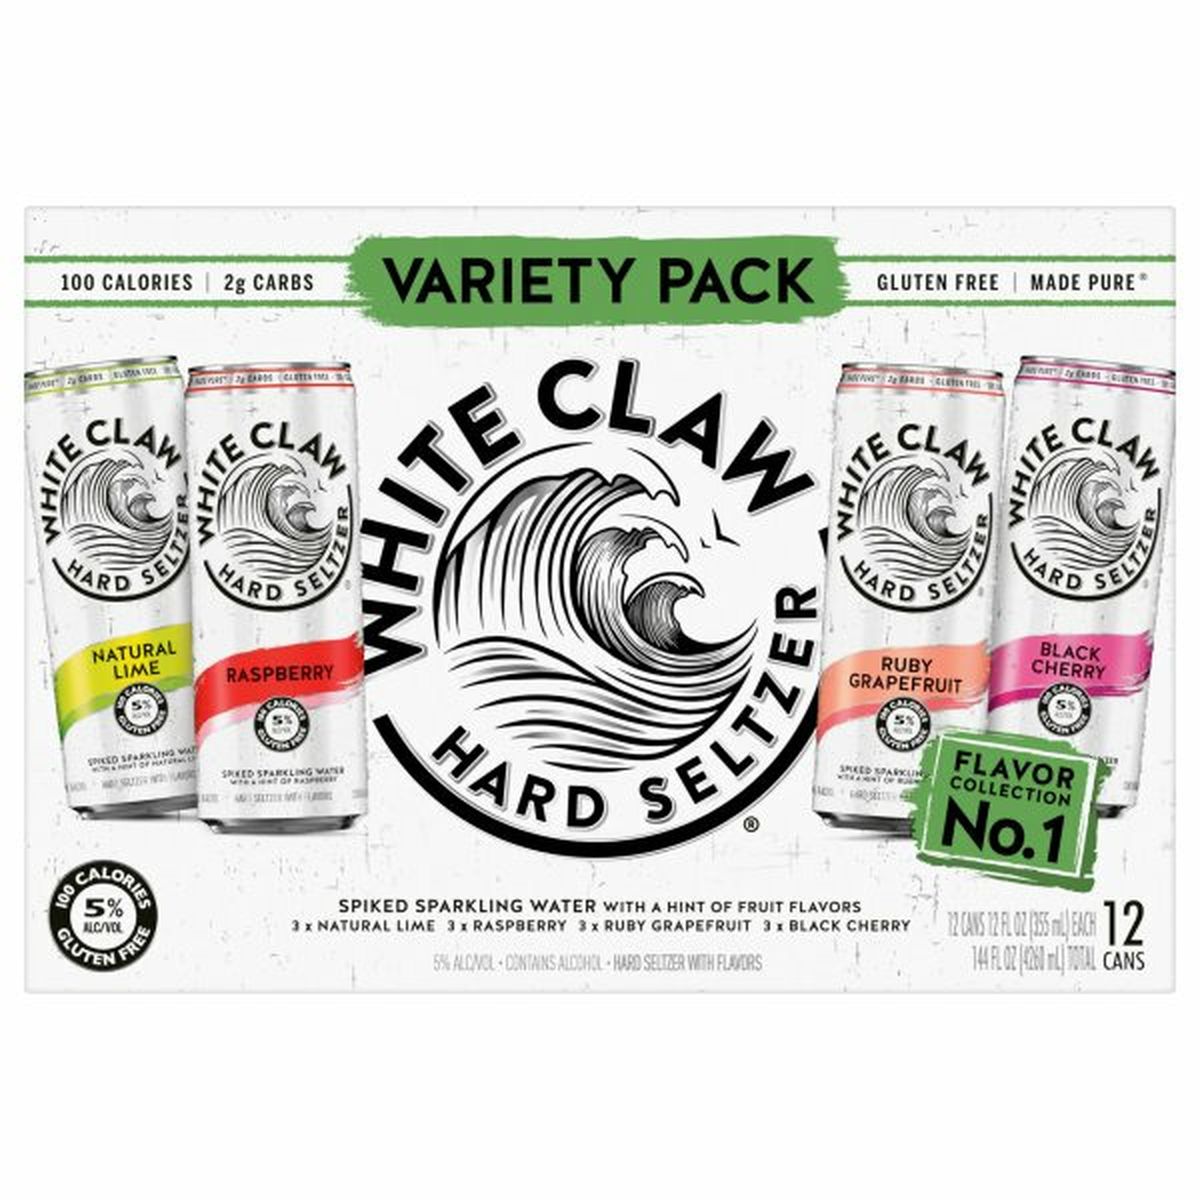 Calories in White Claw Hard Seltzer Variety Pack #1 12/12oz cans